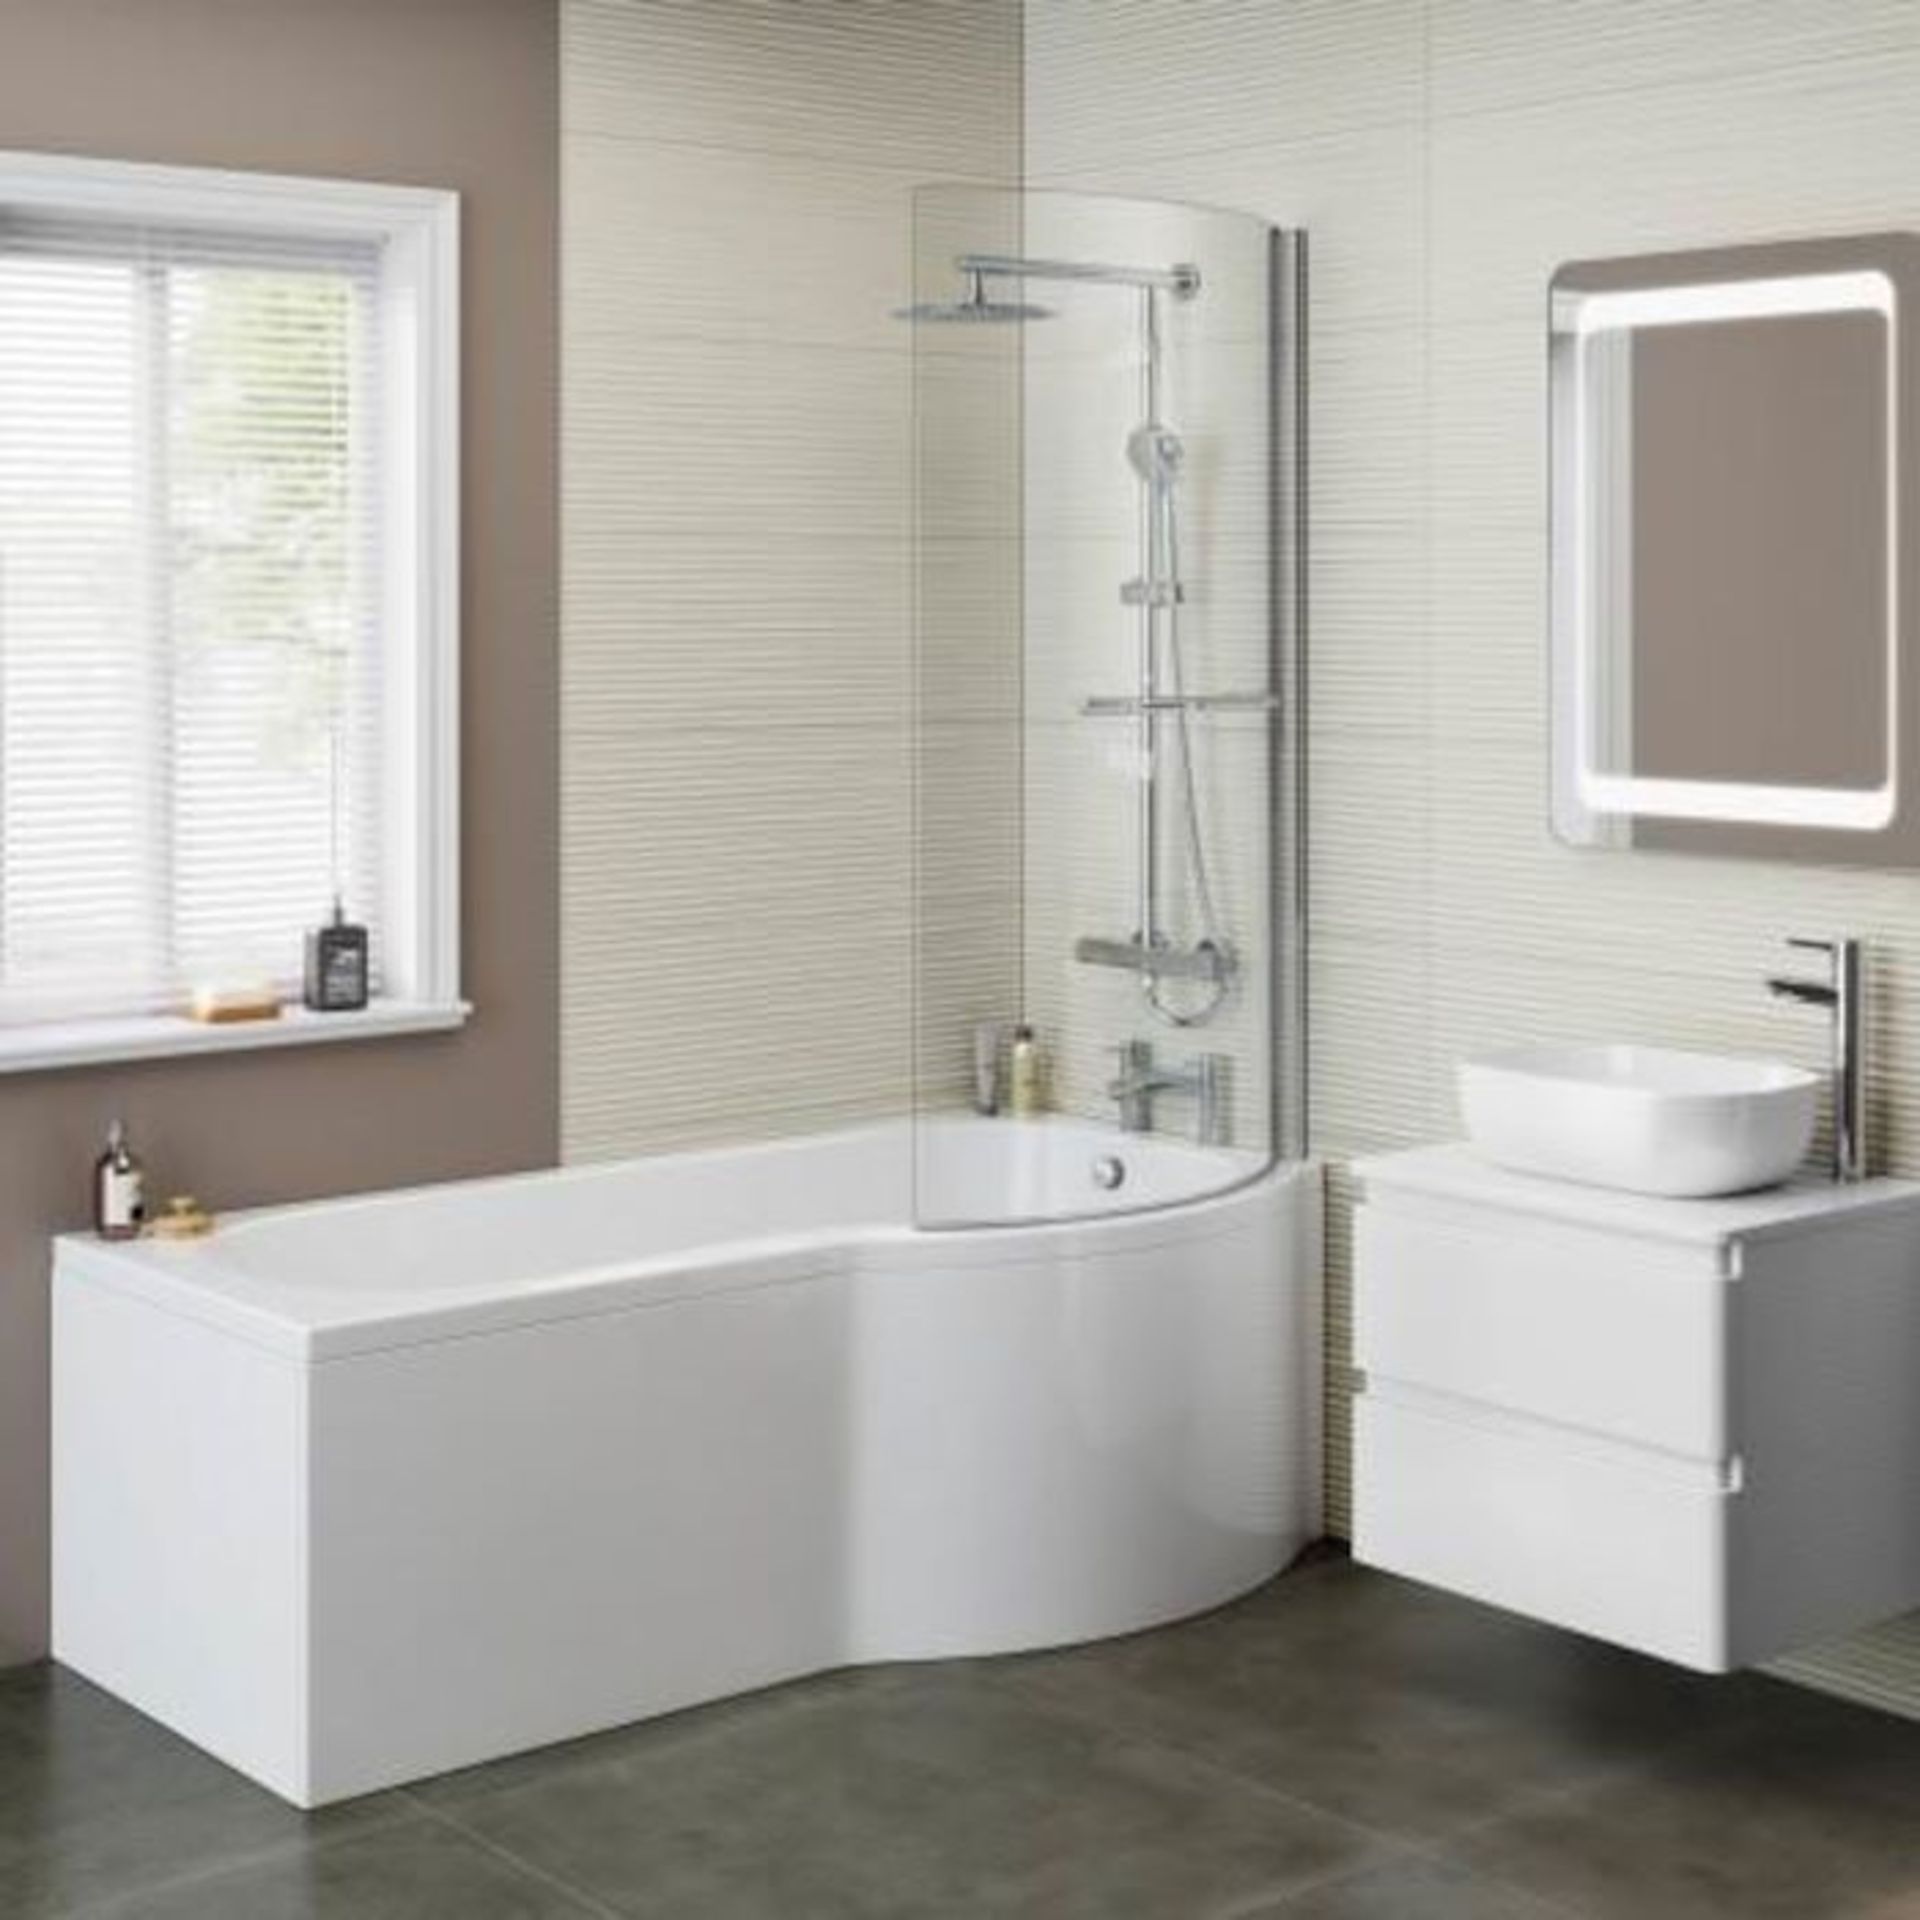 New (U157) 1700x850mm - Right Hand P-Shaped Bath. Rrp £399.99. Ideal Space Saving Solution Fo...